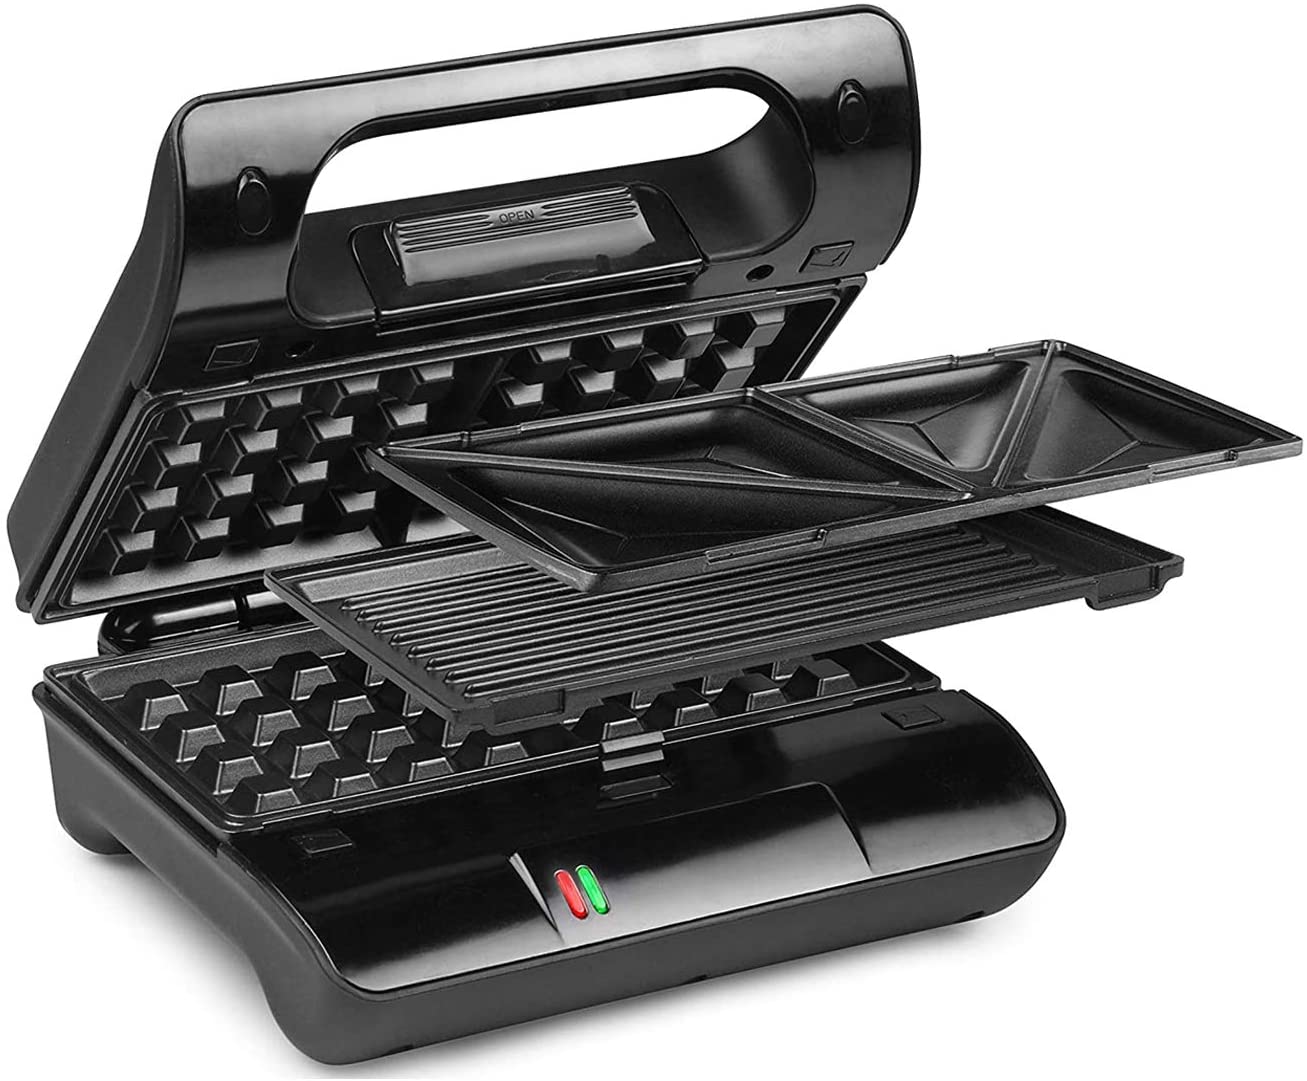 Kontaktgrill With barbecue tongs, waffle iron and sandwich maker 3-in-1 interchangeable plates, 23 x 13 cm.